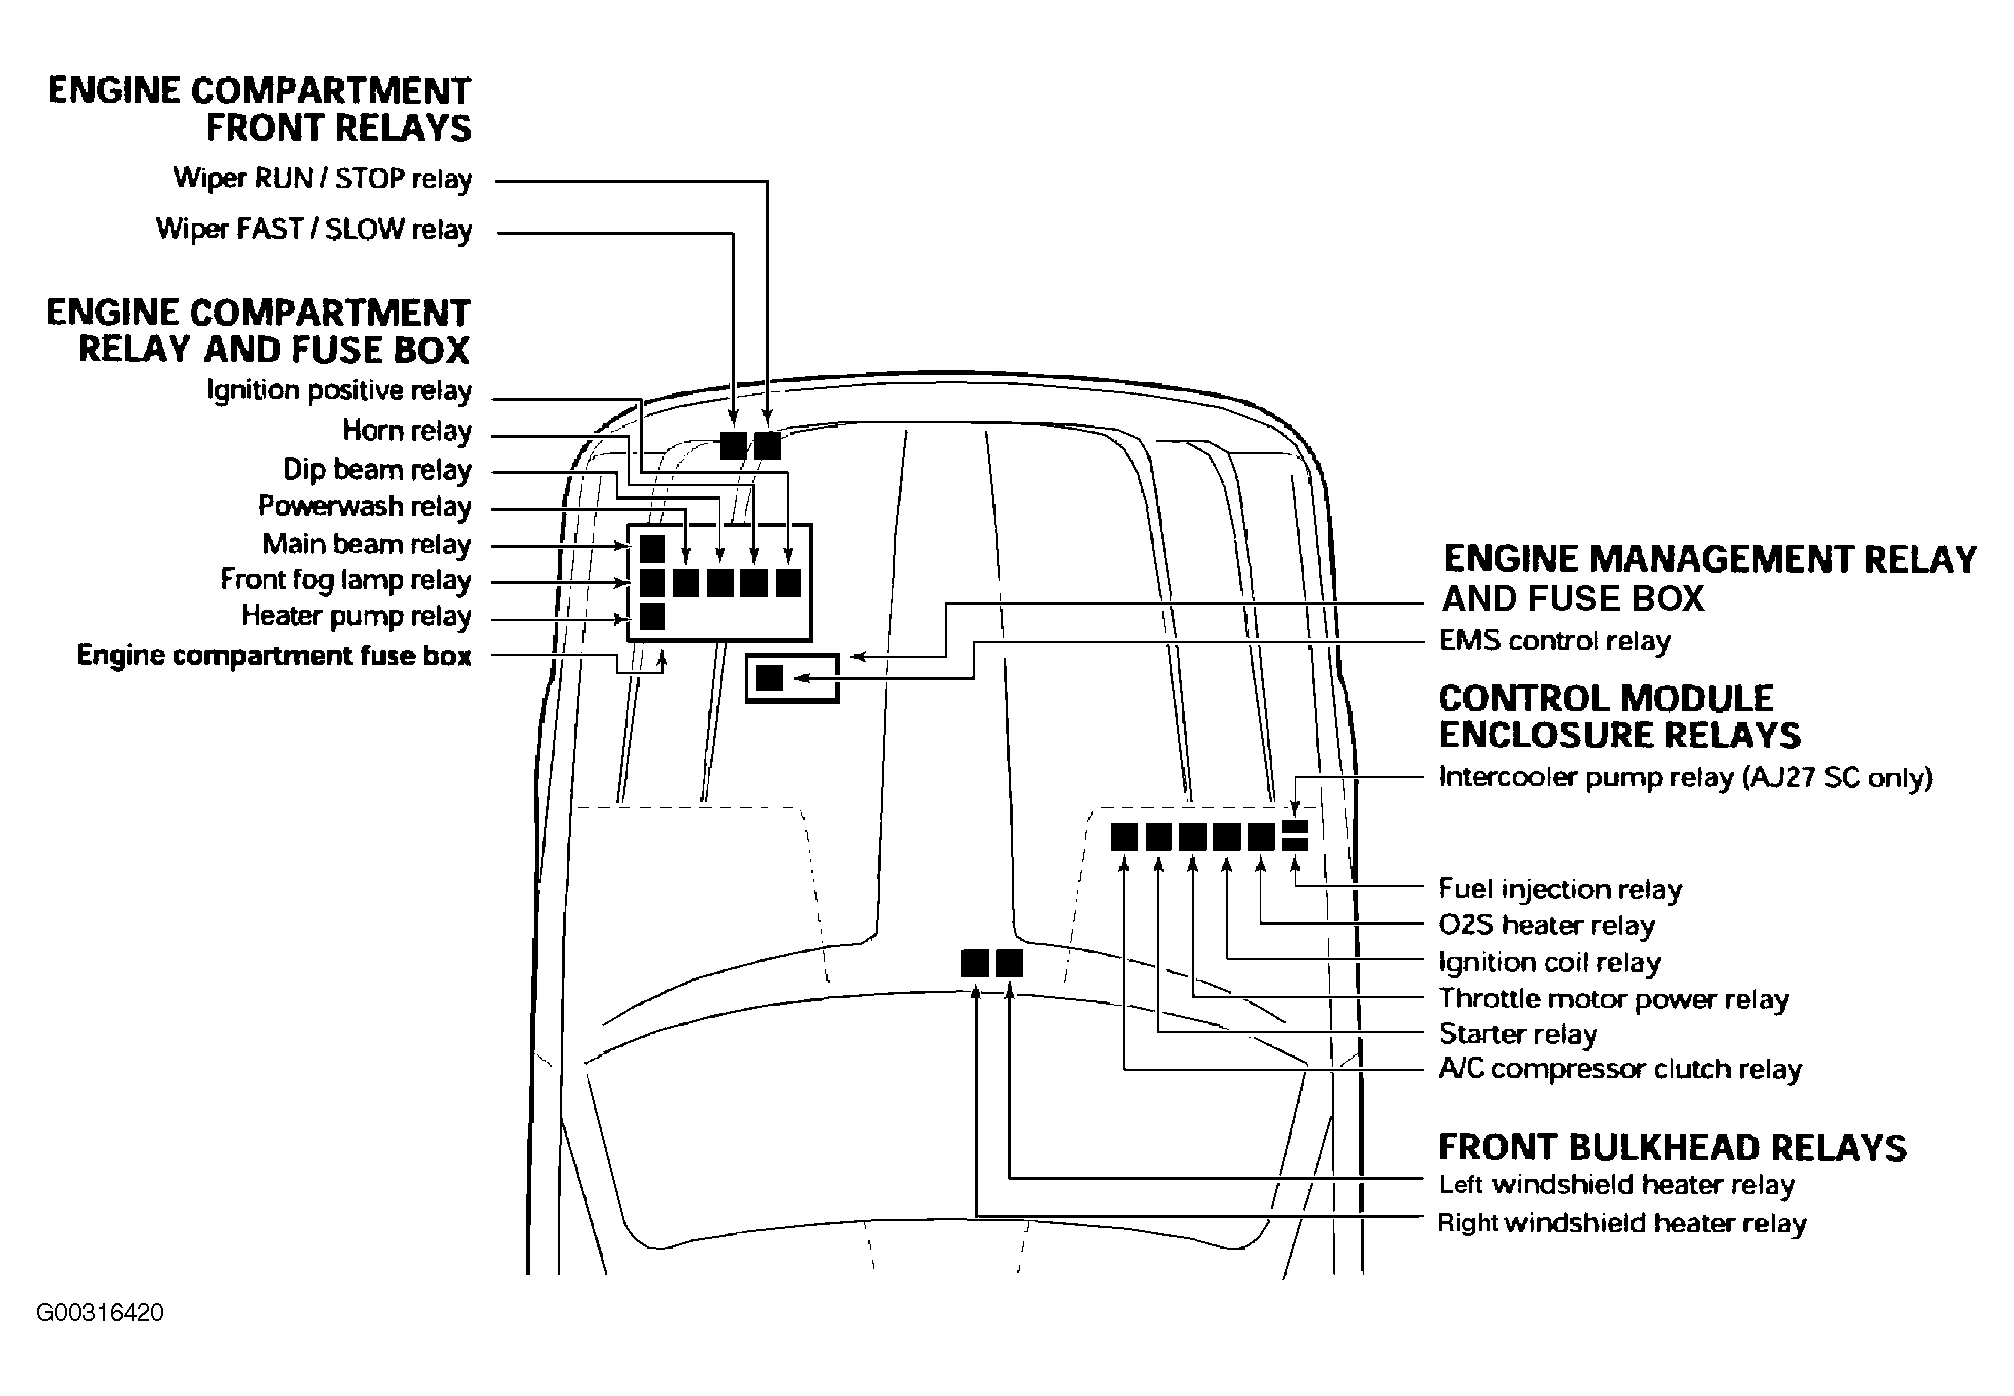 Jaguar XJR 2003 - Component Locations -  Identifying Engine Compartment Fuse/Relay Locations